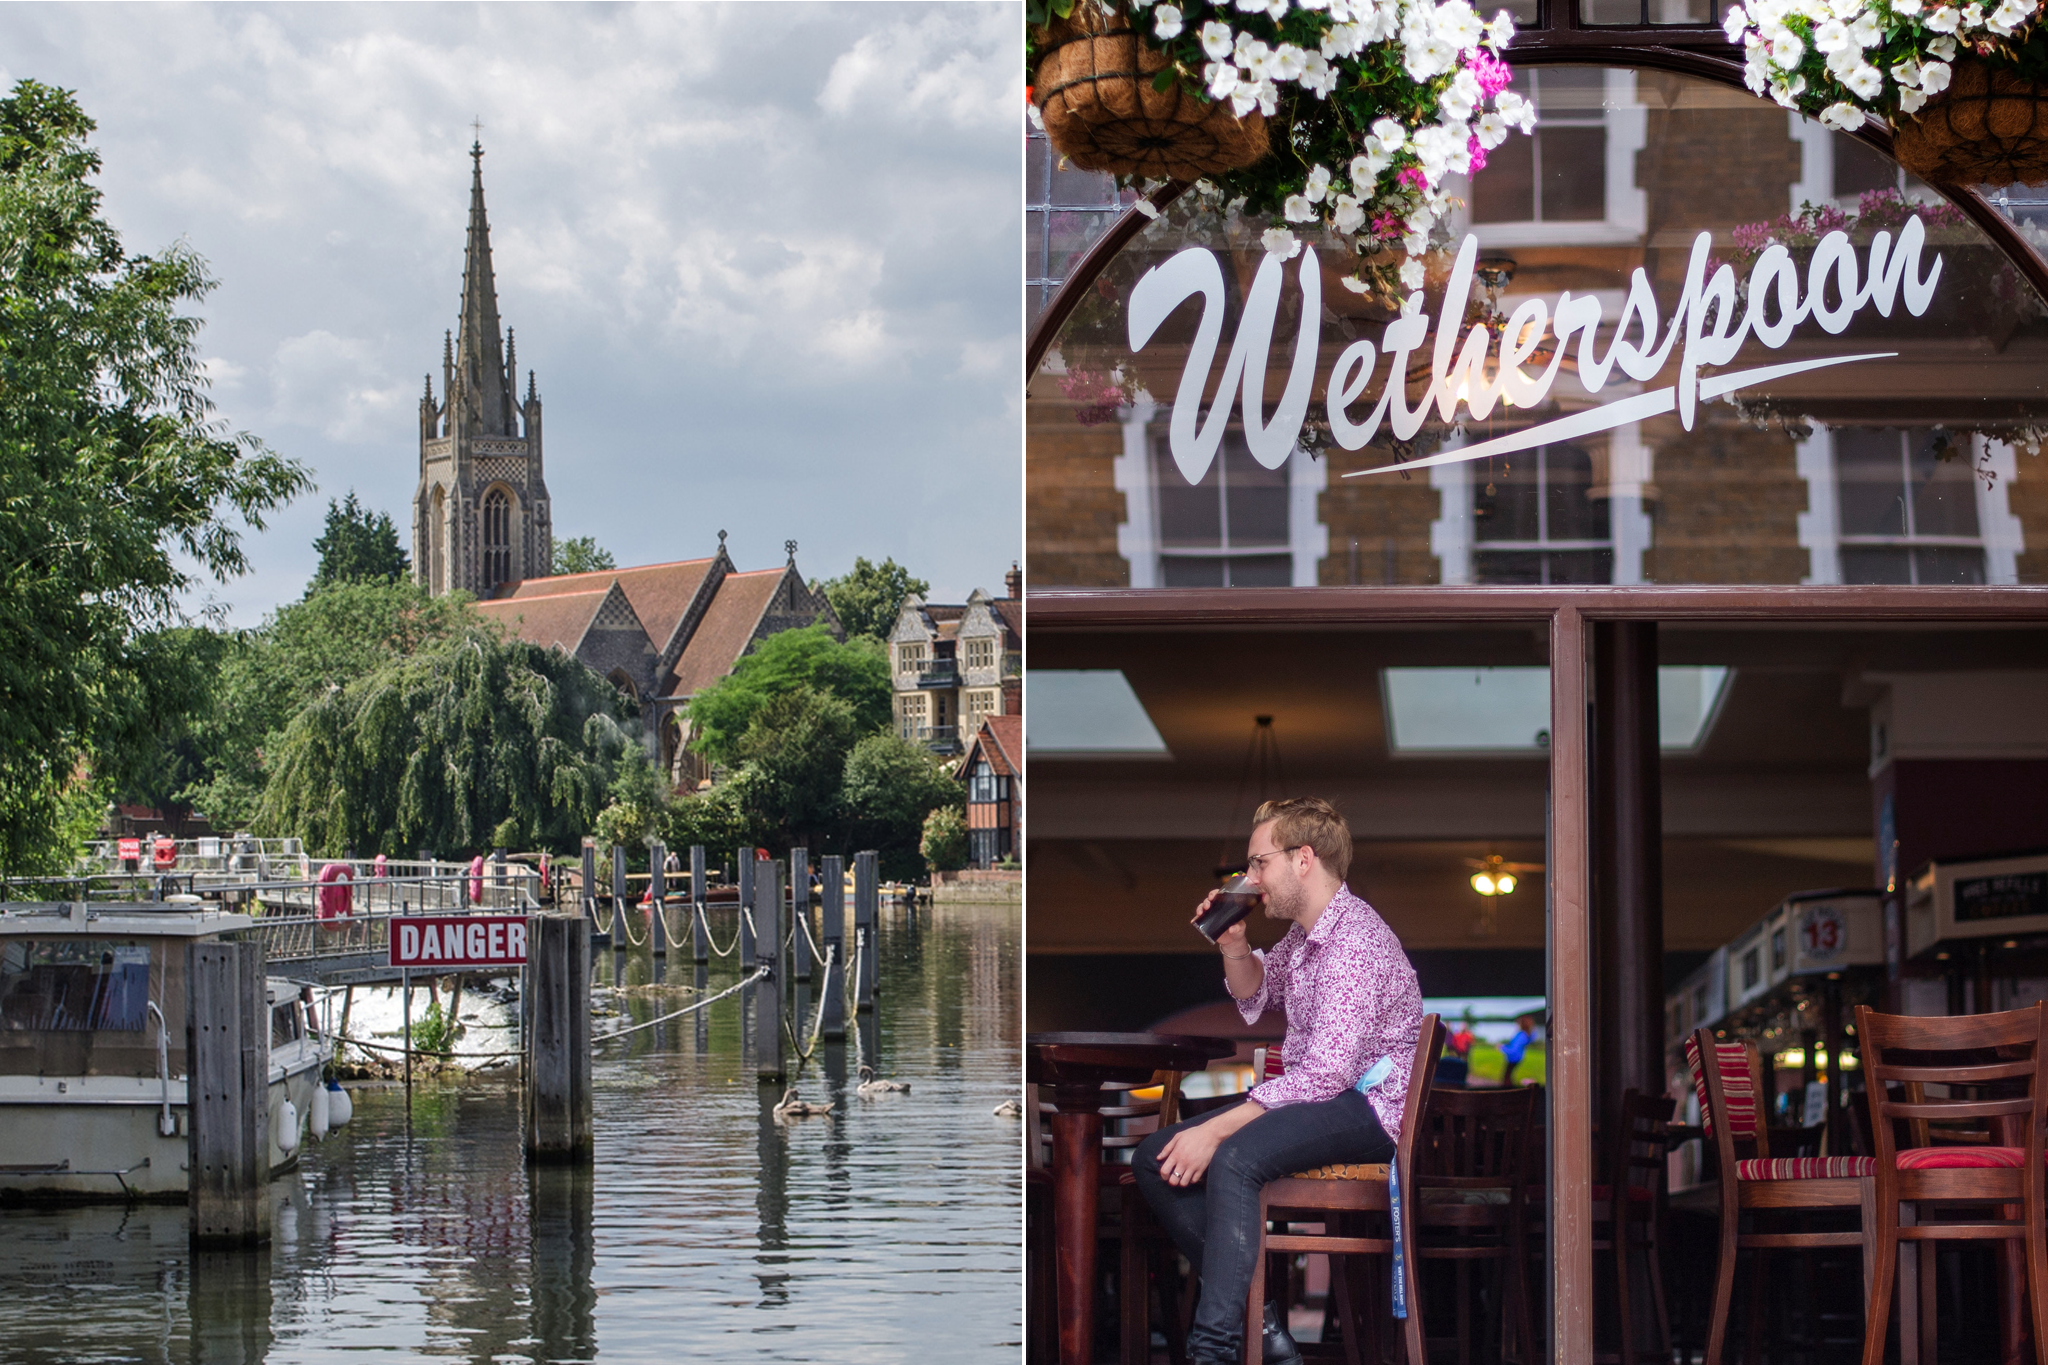 Residents of Marlow in Buckinghamshire are incensed at the prospect of a Wetherspoons opening on the town’s posh high street